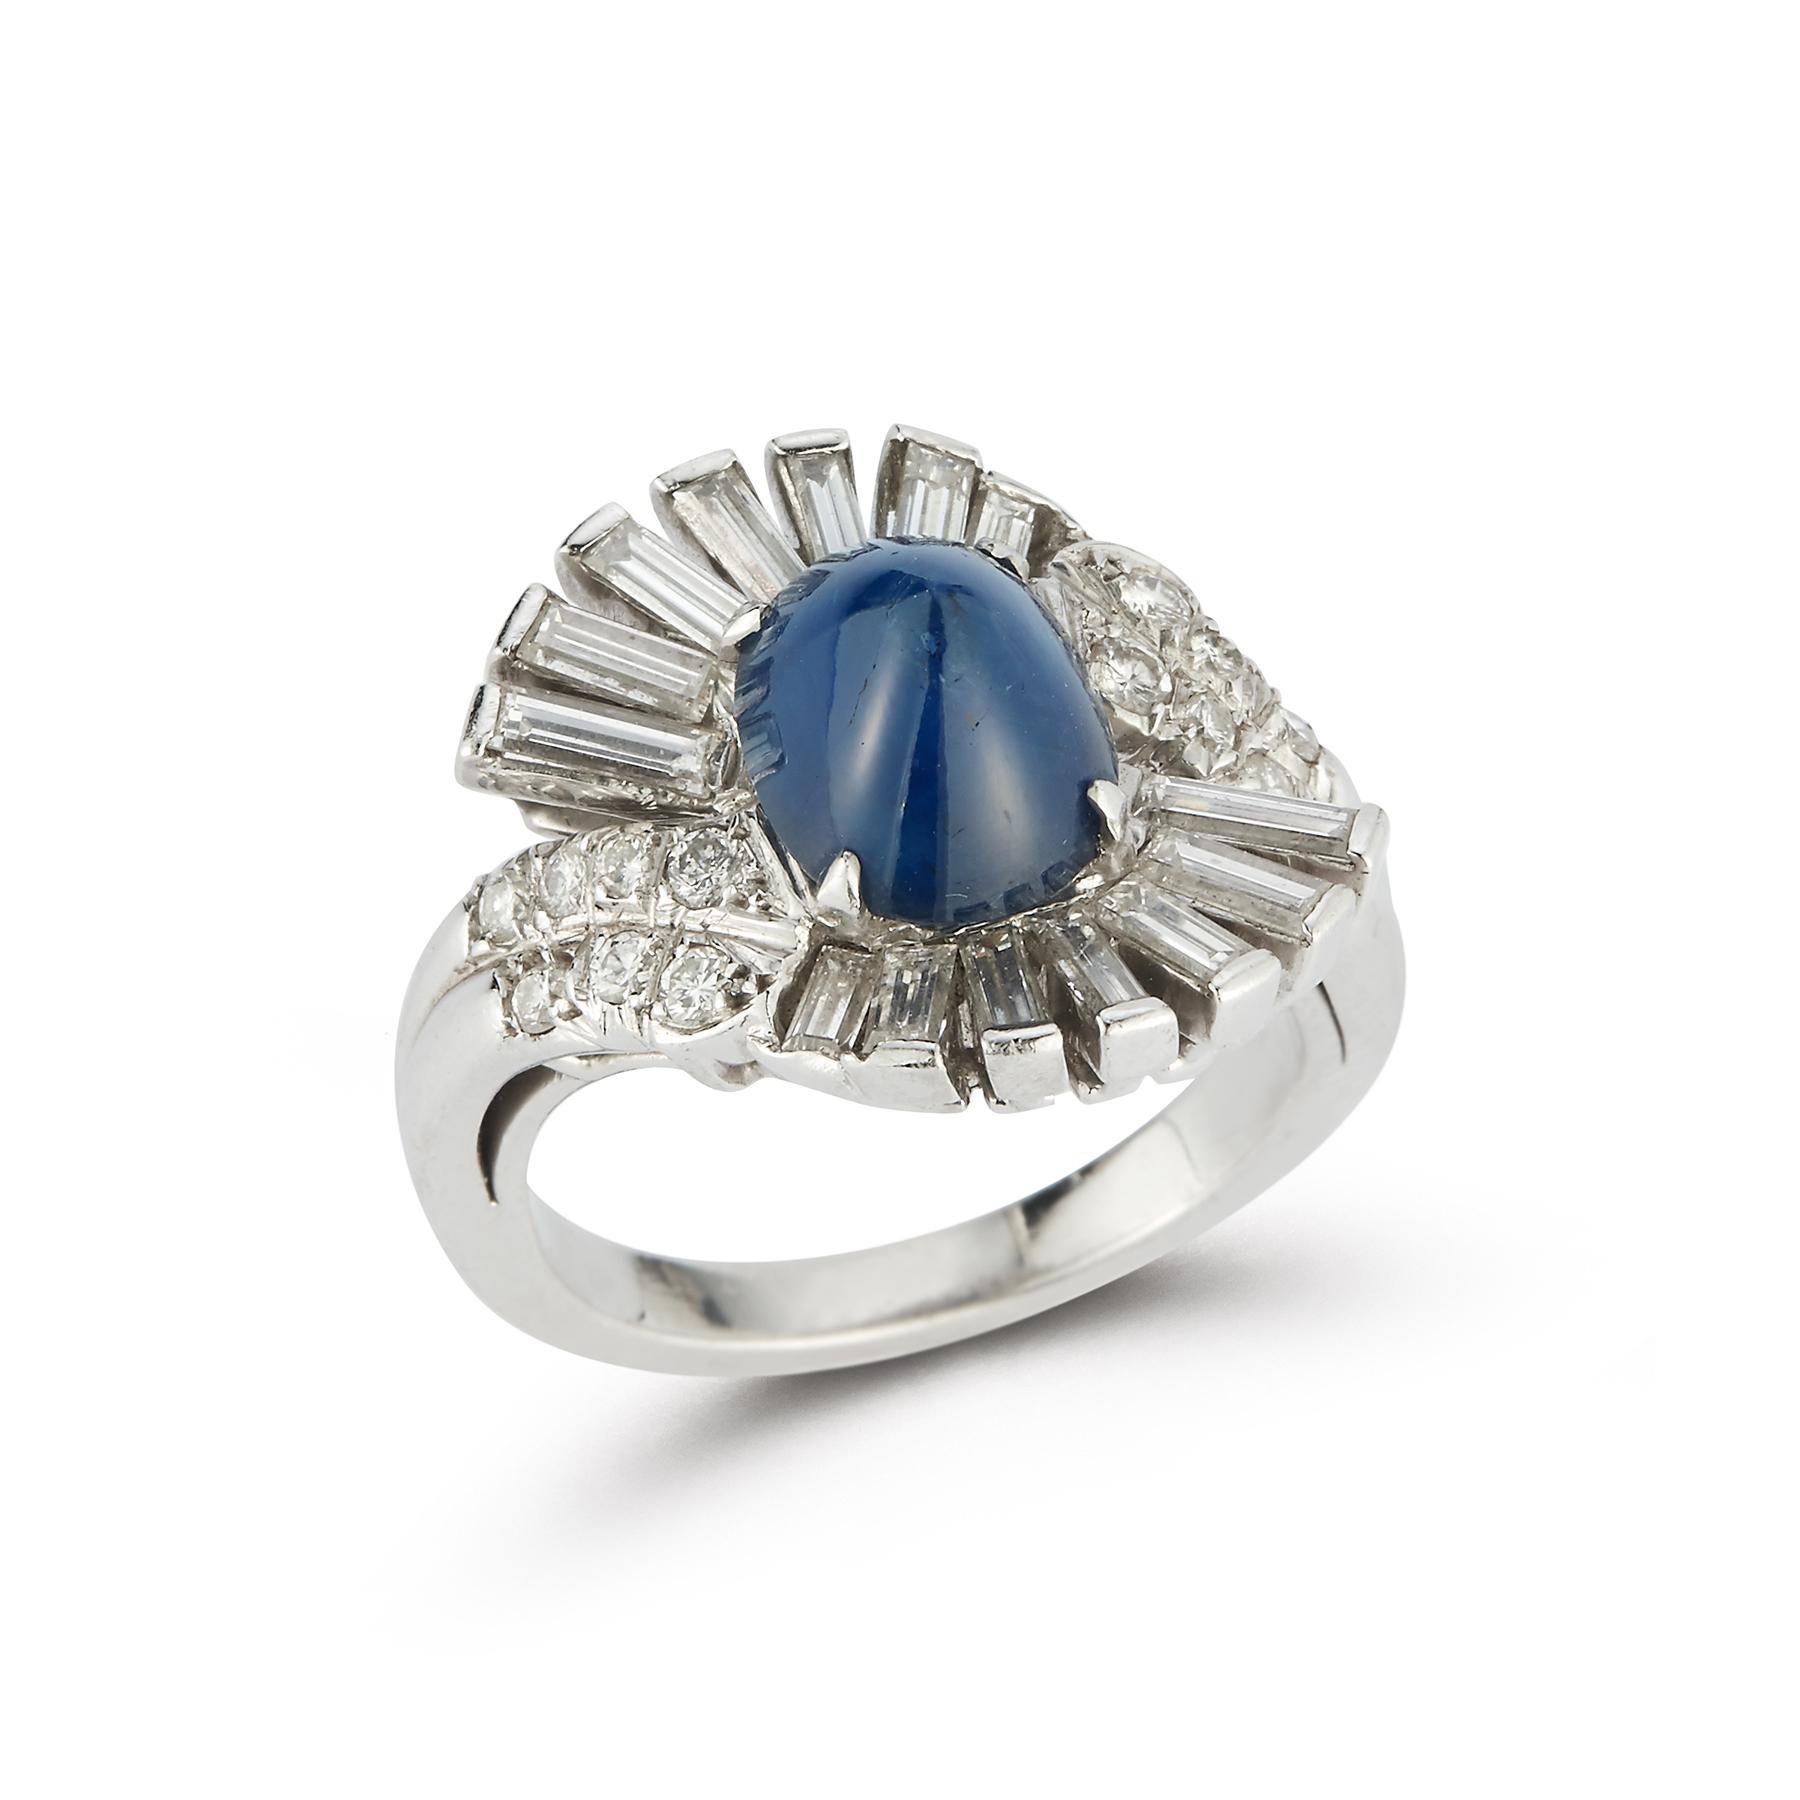 Art Deco Style Cabochon Sapphire & Diamond Cocktail Ring
Sapphire Weight: approximately 4.14 Cts 
Round Diamond Weight: approximately .32 Cts 
Baguette Diamond Weight:.95 Cts
Ring Size: 6.25
Resizable Free of charge 
Gold Type: Platinum
Made circa